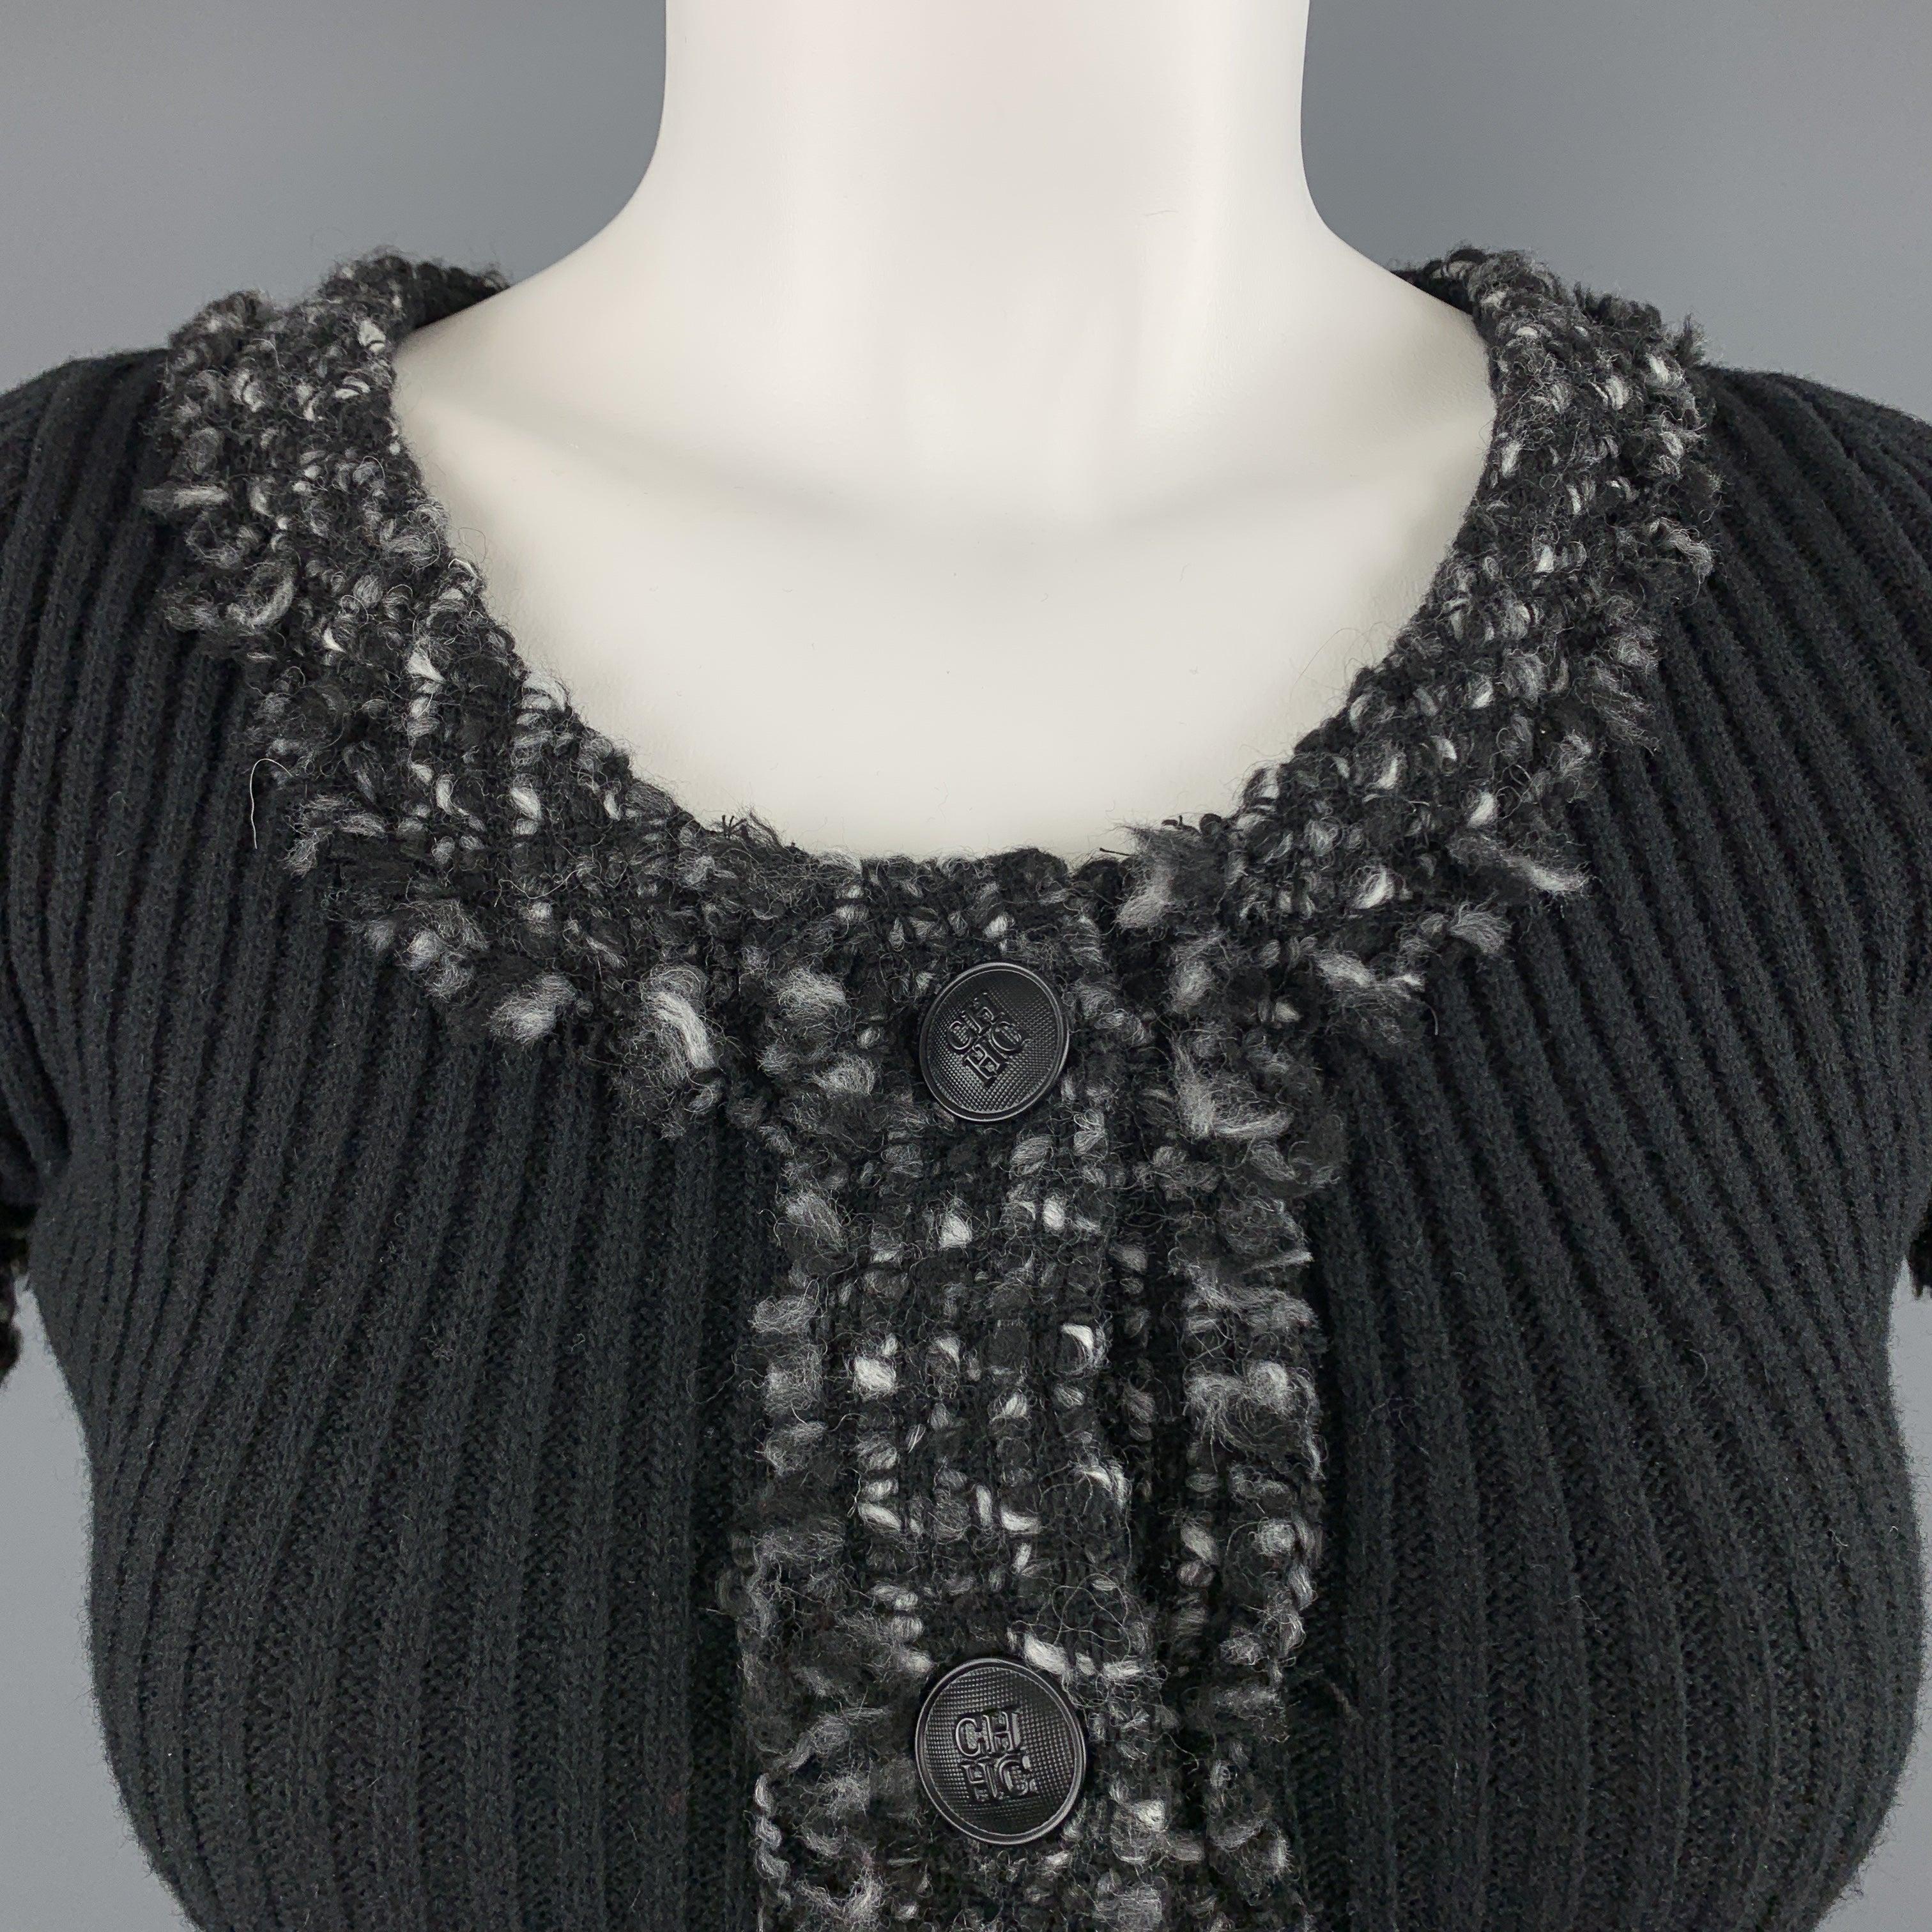 CAROLINA HERRERA pullover sweater comes in black ribbed knit with a round neckline, half button front, and gray tweed knit trim. Made in Spainches 
Excellent
Pre-Owned Condition. 

Marked:   XS 

Measurements: 
 
Shoulder:
12 inches Bust:
32 inches